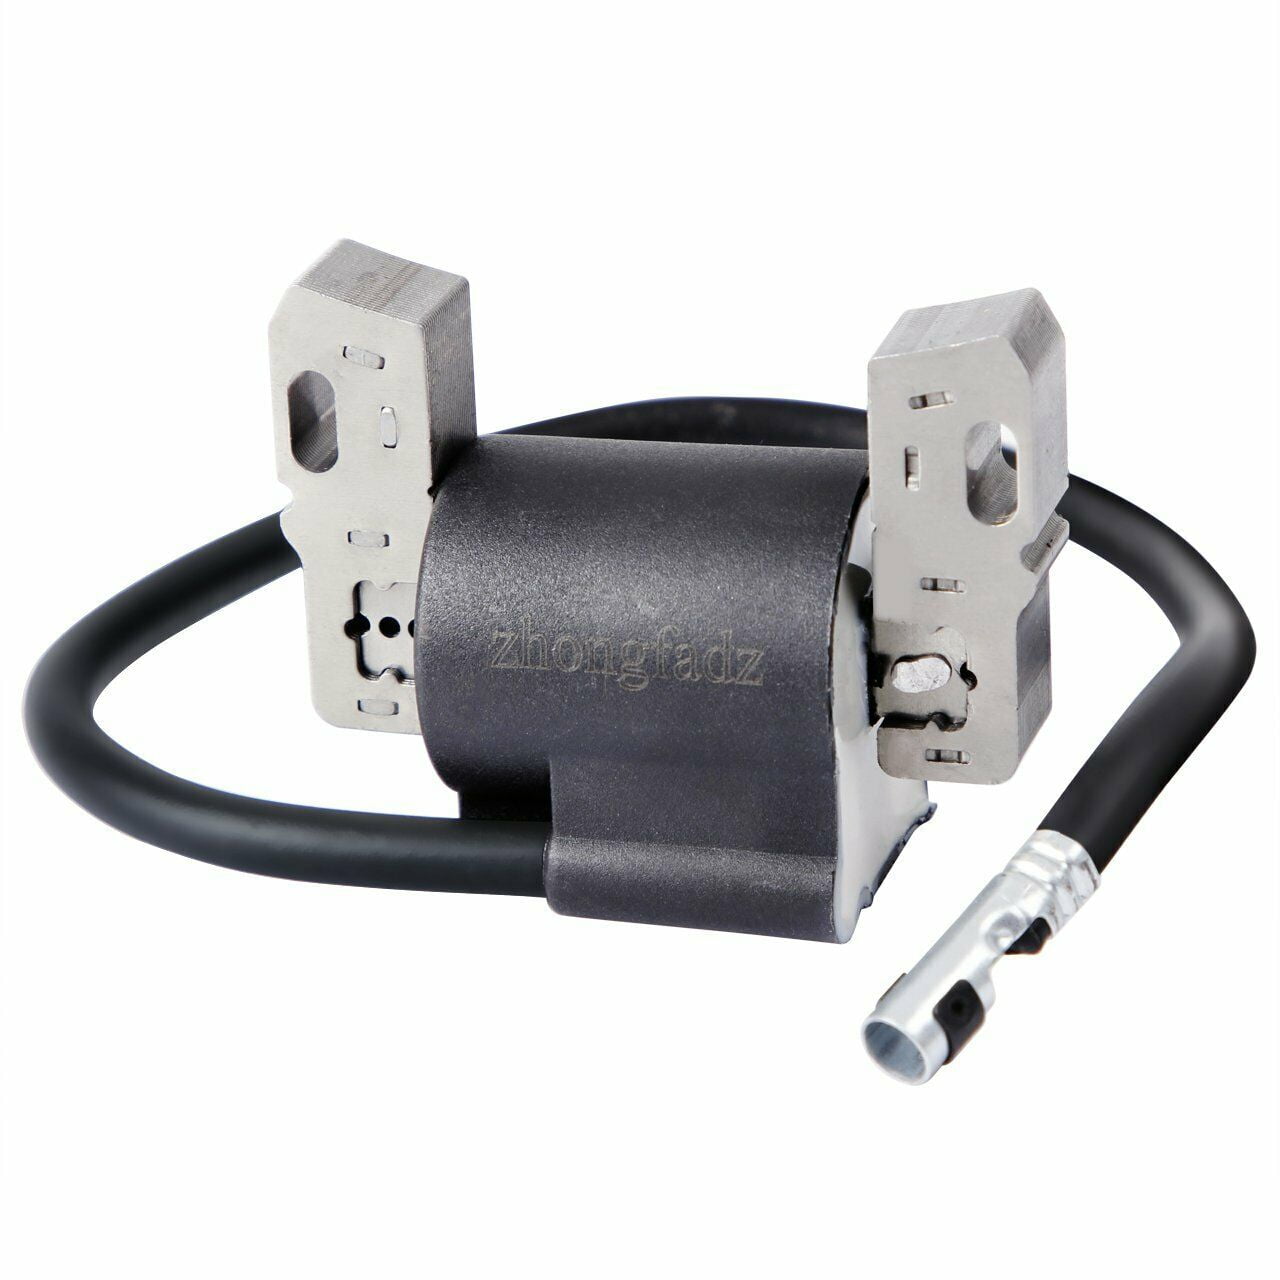 nothing grade mordant High Performance Ignition Coil Module For Briggs & Stratton John Deere  490586 US - Walmart.com